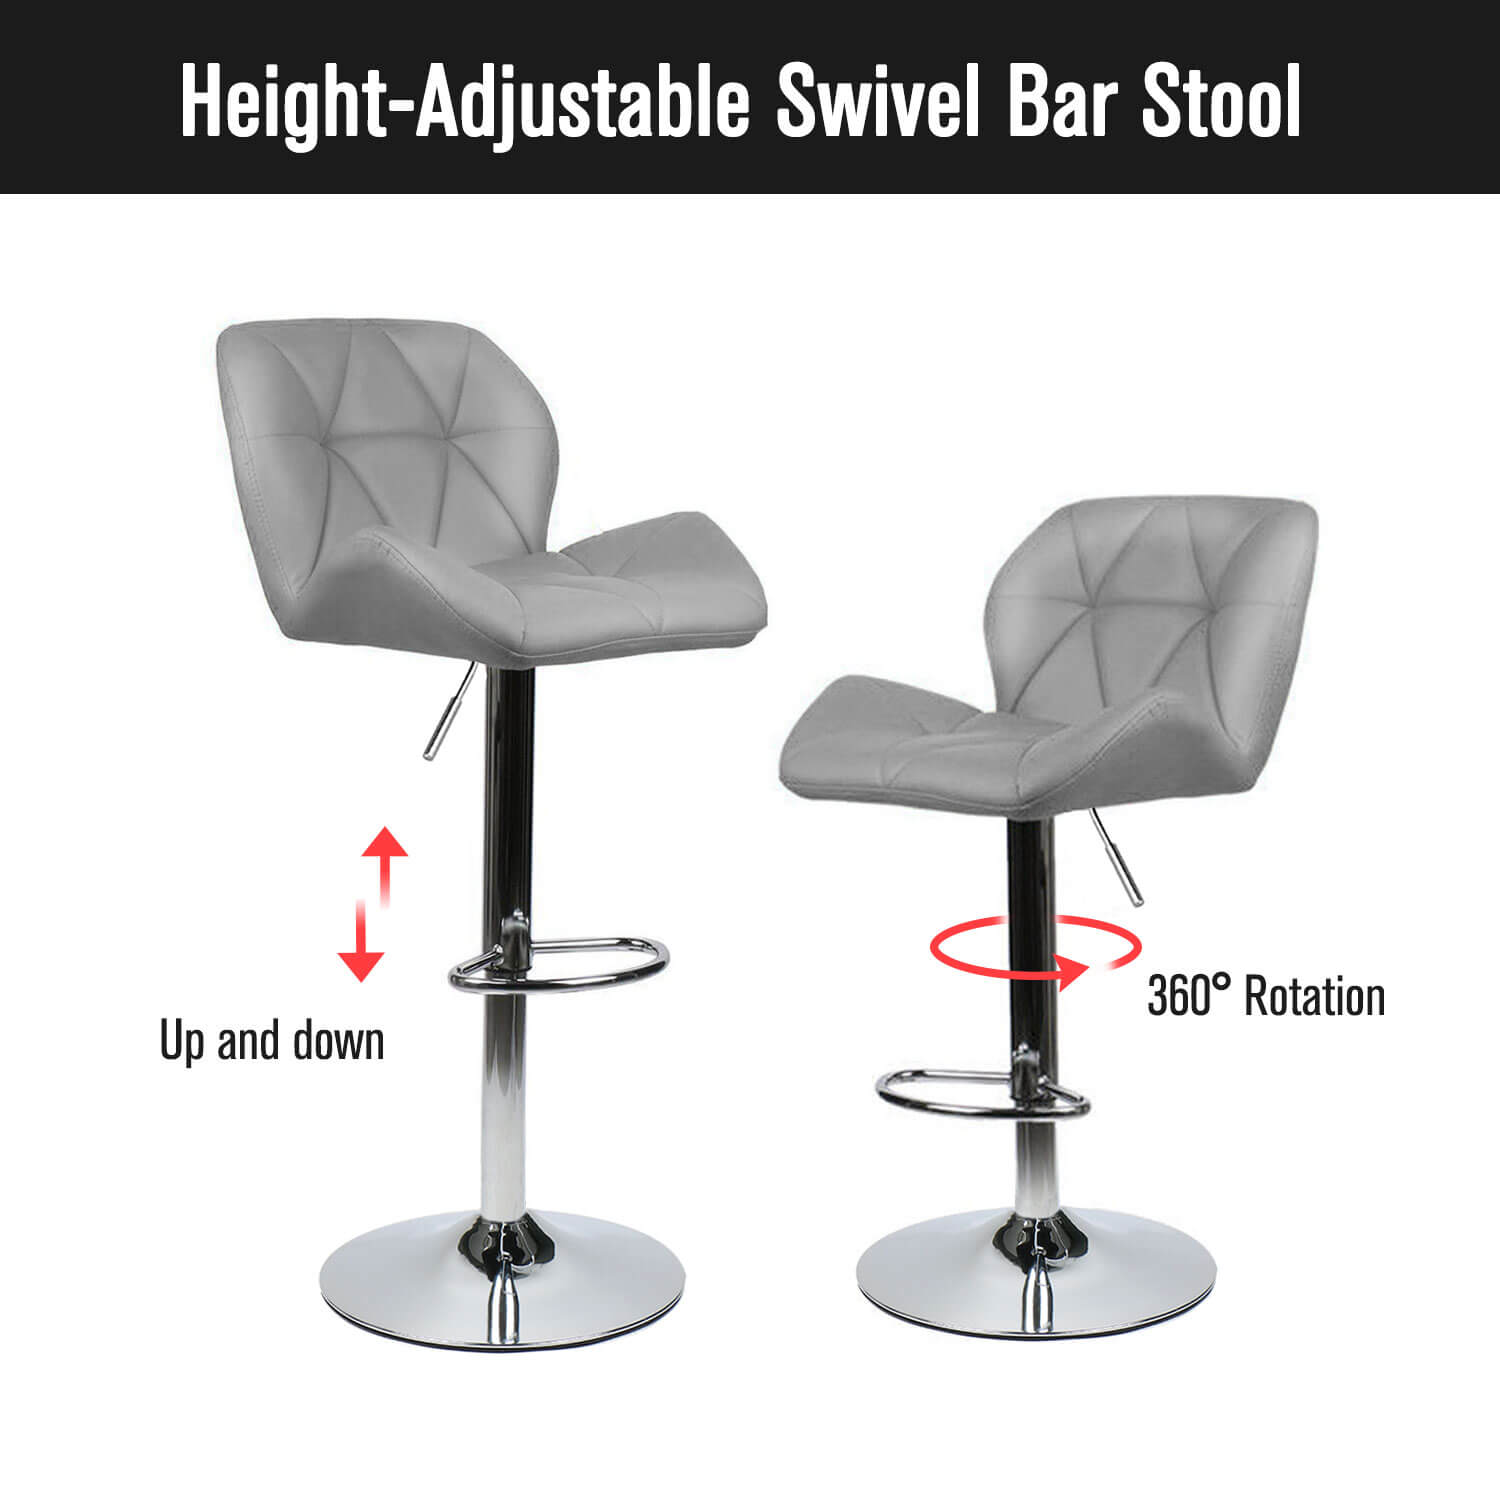 Elecwish sliver bar stool OW001 is a height-adjustable swivel bar stool